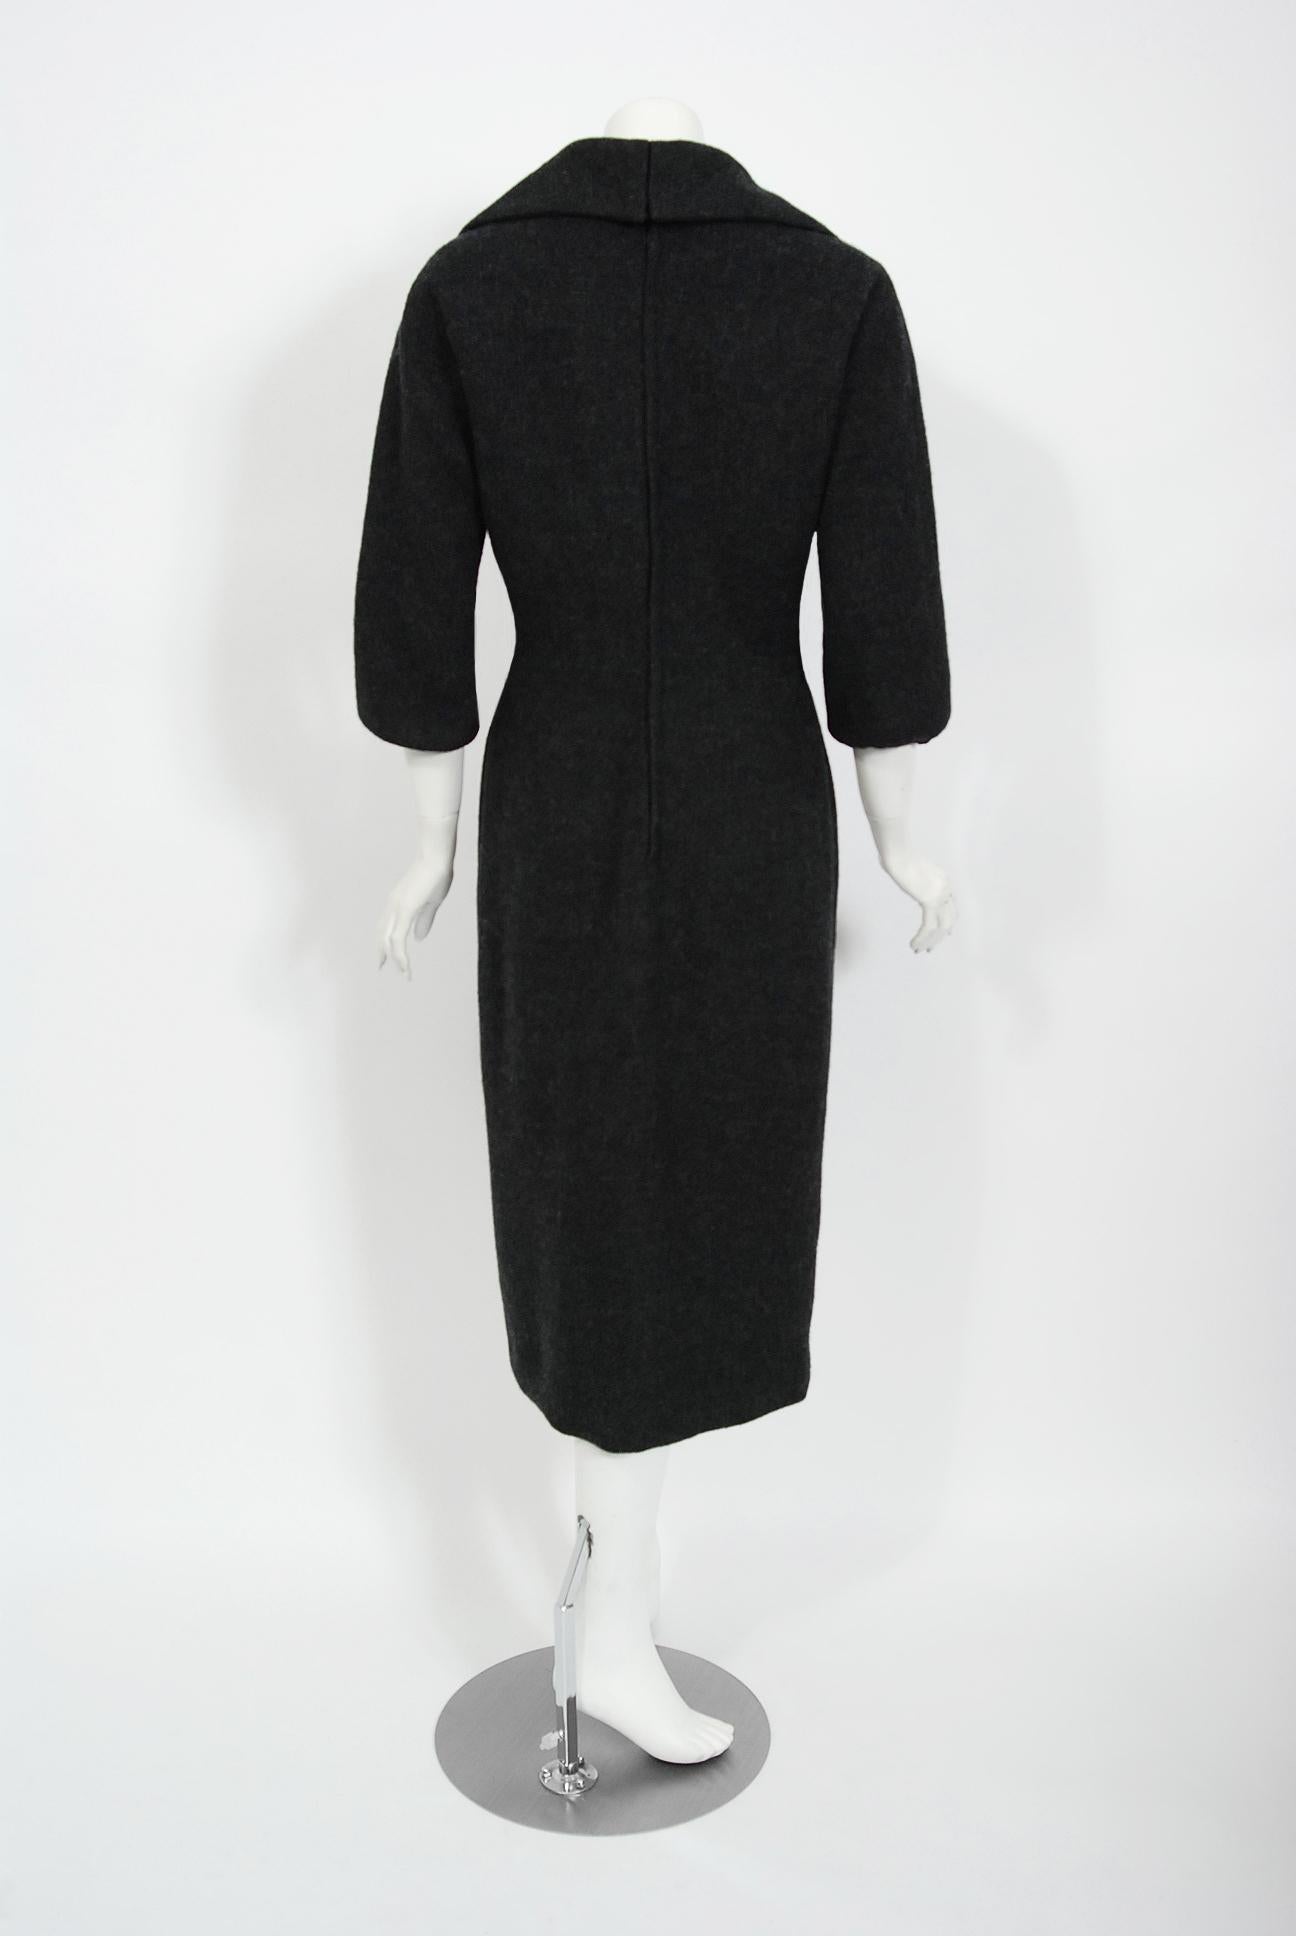 1955 Christian Dior Haute Couture Documented Charcoal-Gray Wool Sheath Dress  In Good Condition In Beverly Hills, CA